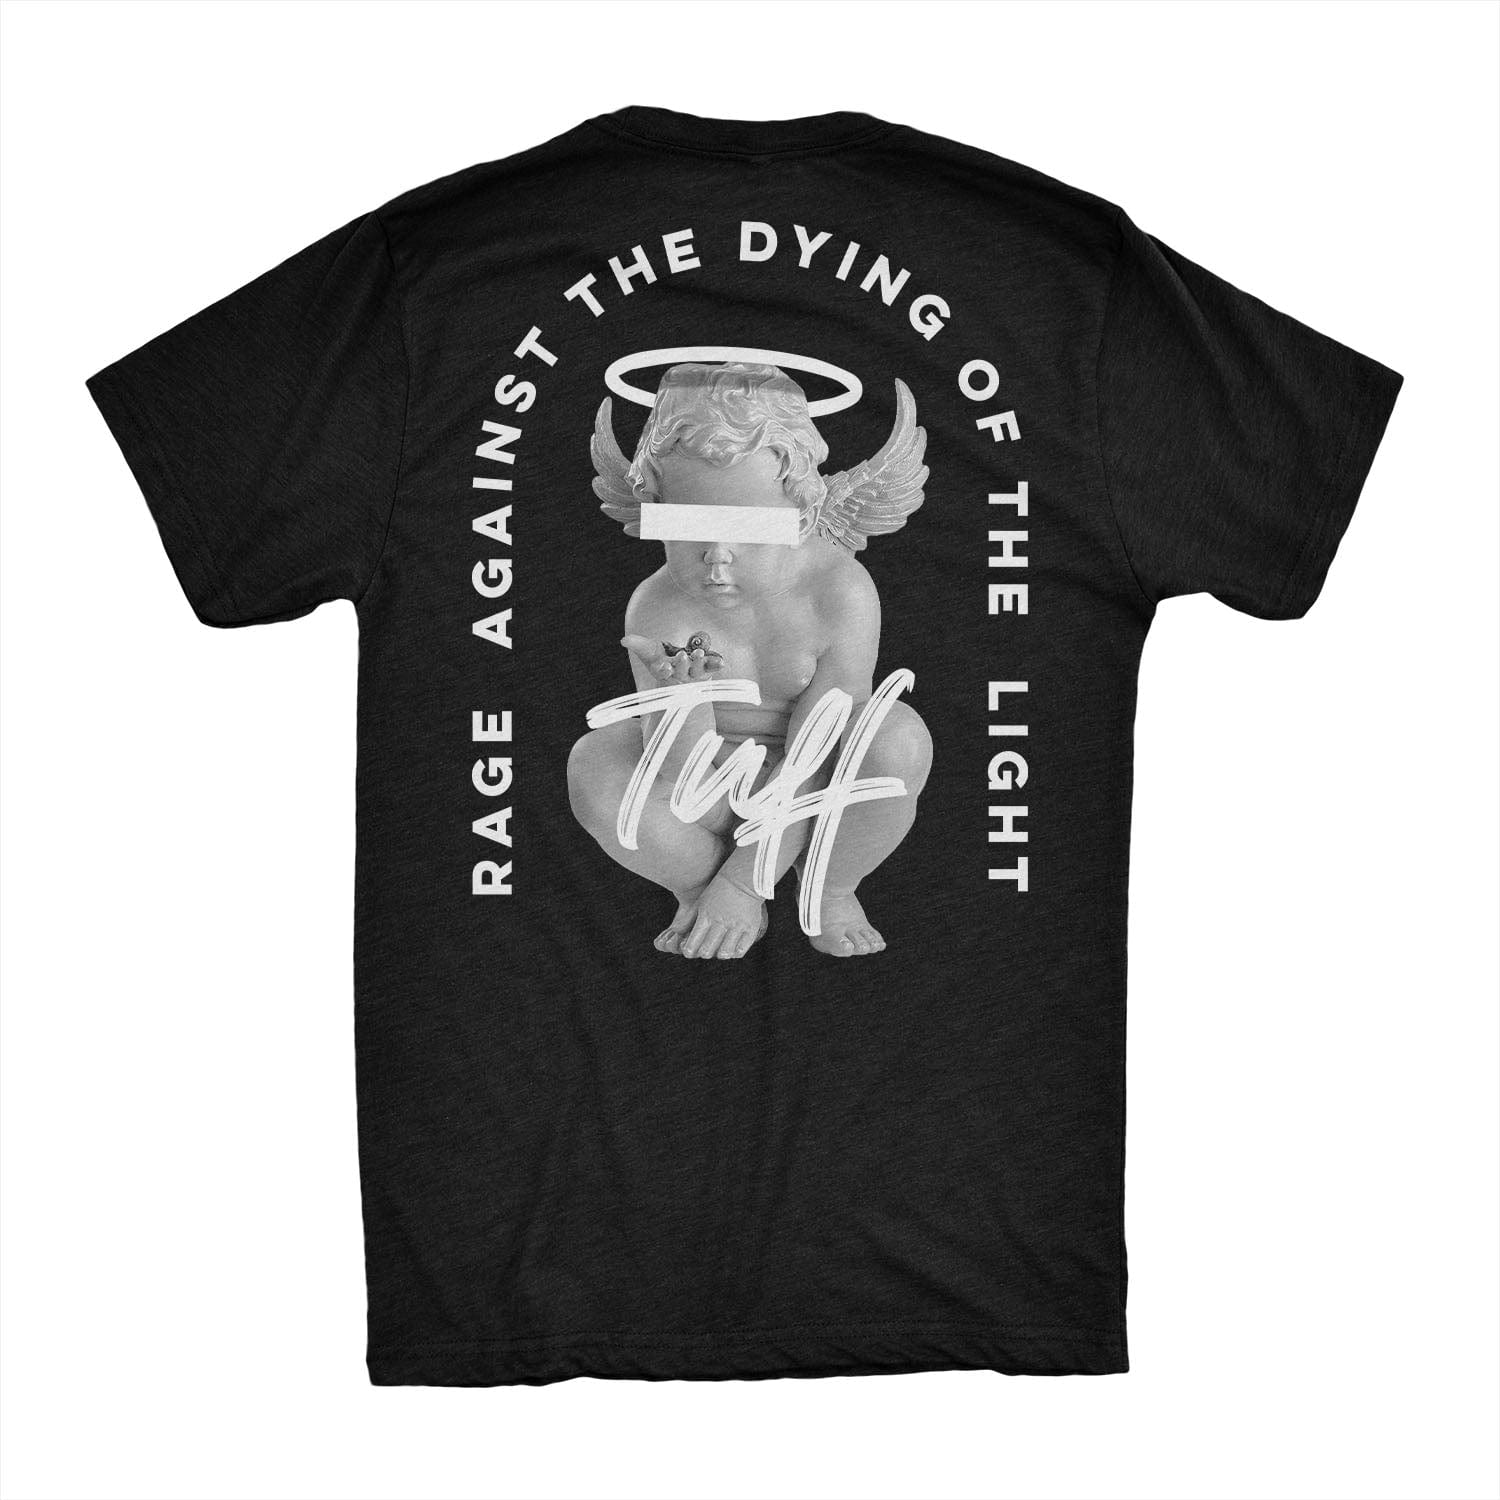 Rage Against the Dying of the Light Tee T-shirt